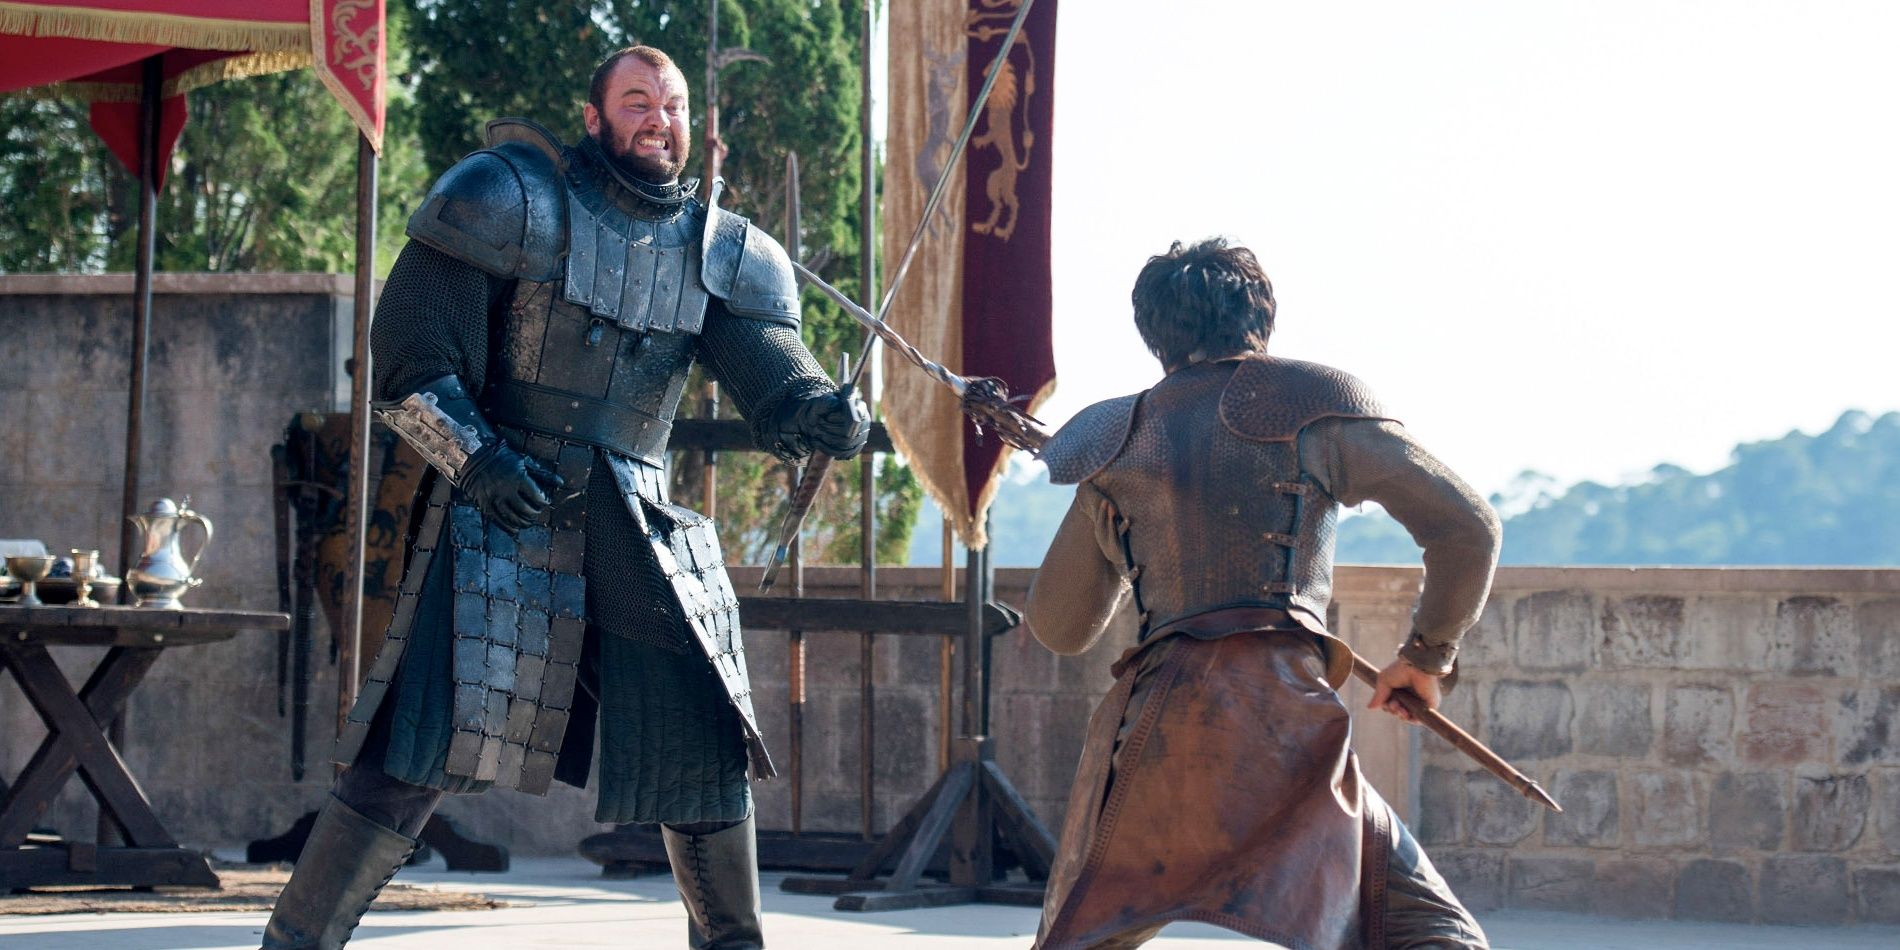 Game of Thrones, The Mountain and Oberyn Martell